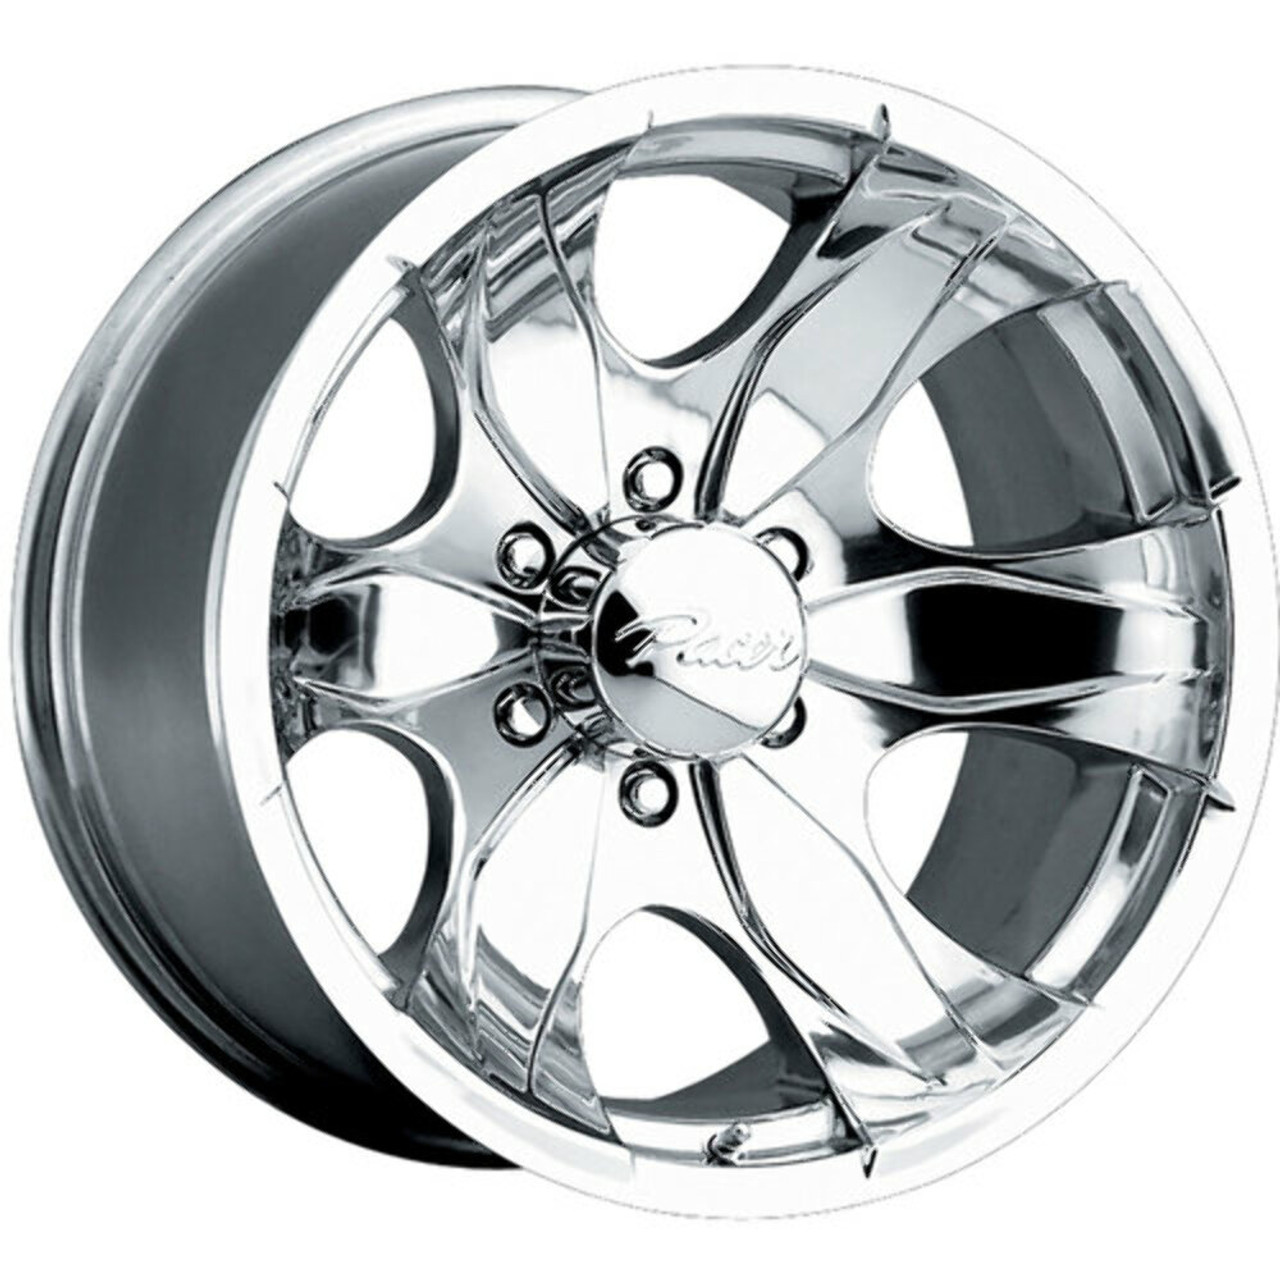 17" Pacer 187P Warrior 17x8 5x5.5 Polished Wheel 10mm For Dodge Ram Truck Rim